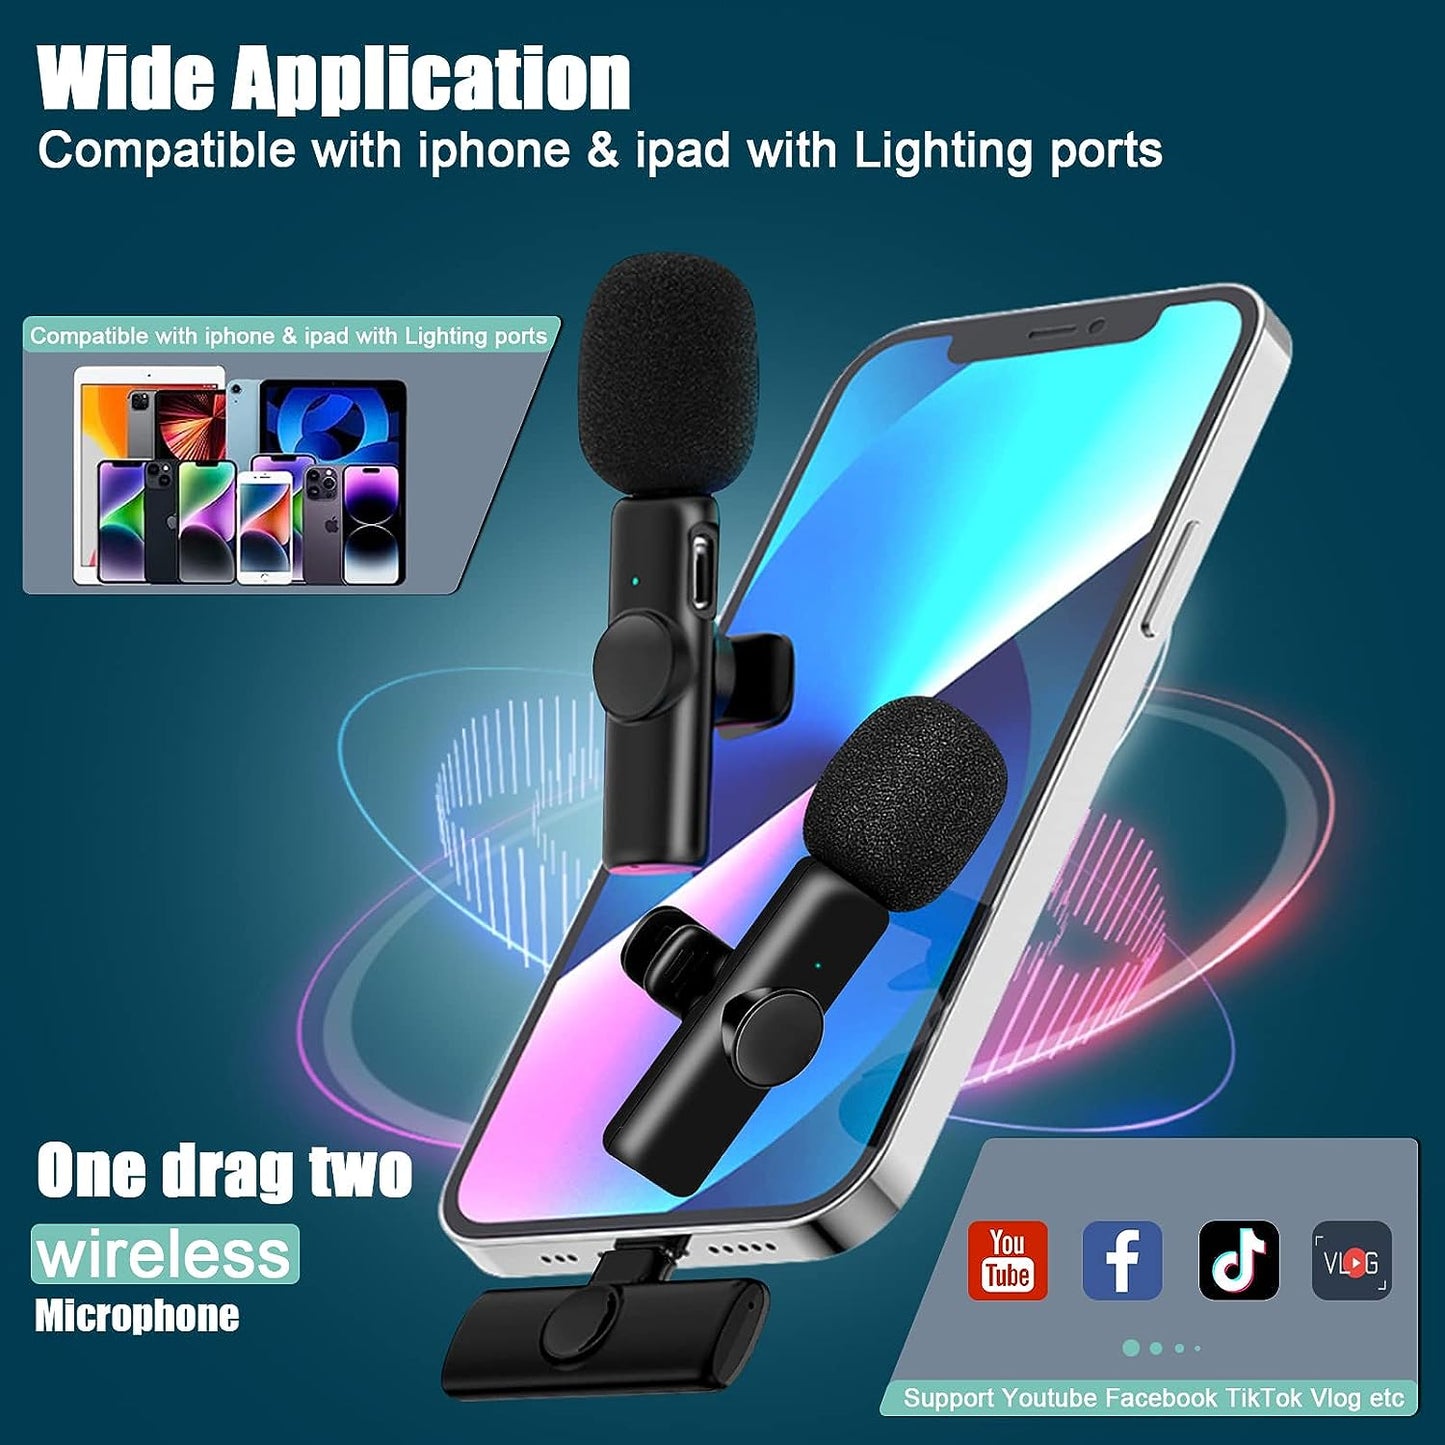 Wireless Lavalier Microphone for iPhone iPad,2.4Ghz Professional Wireless Microphones,Wireless Mic Plug-Play, Lapel Microphone for Video Recording YouTube Interview Vlog Live Stream